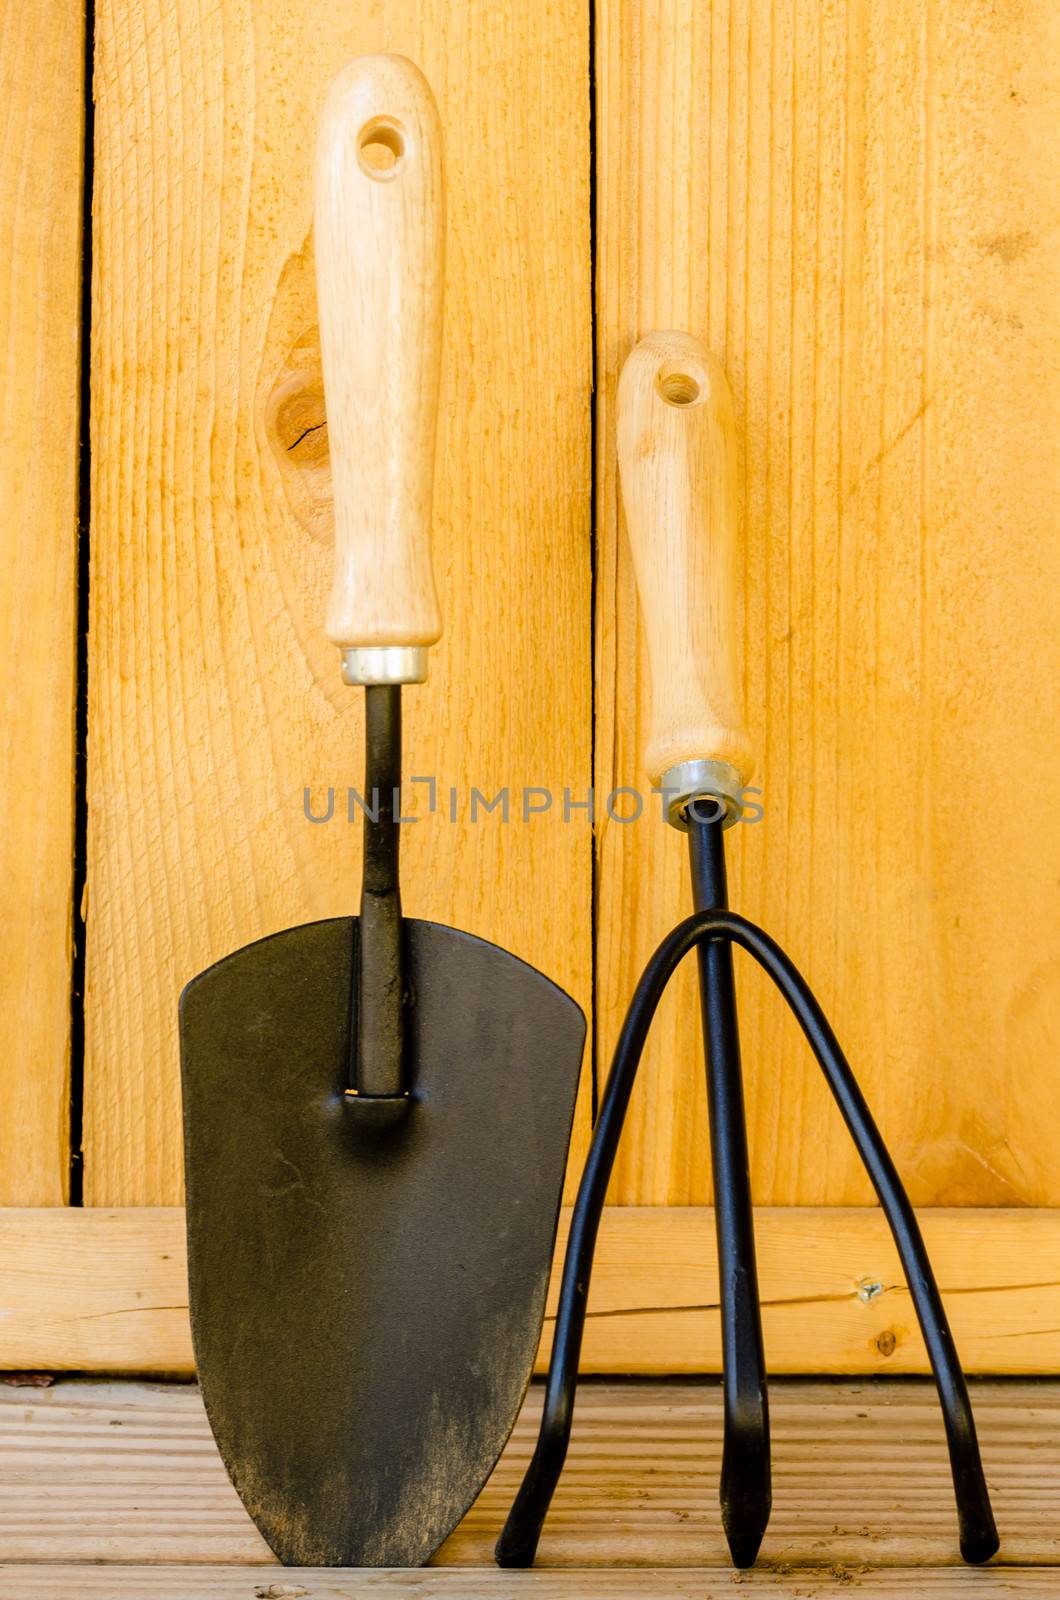 Trowel and Cultivator by dehooks